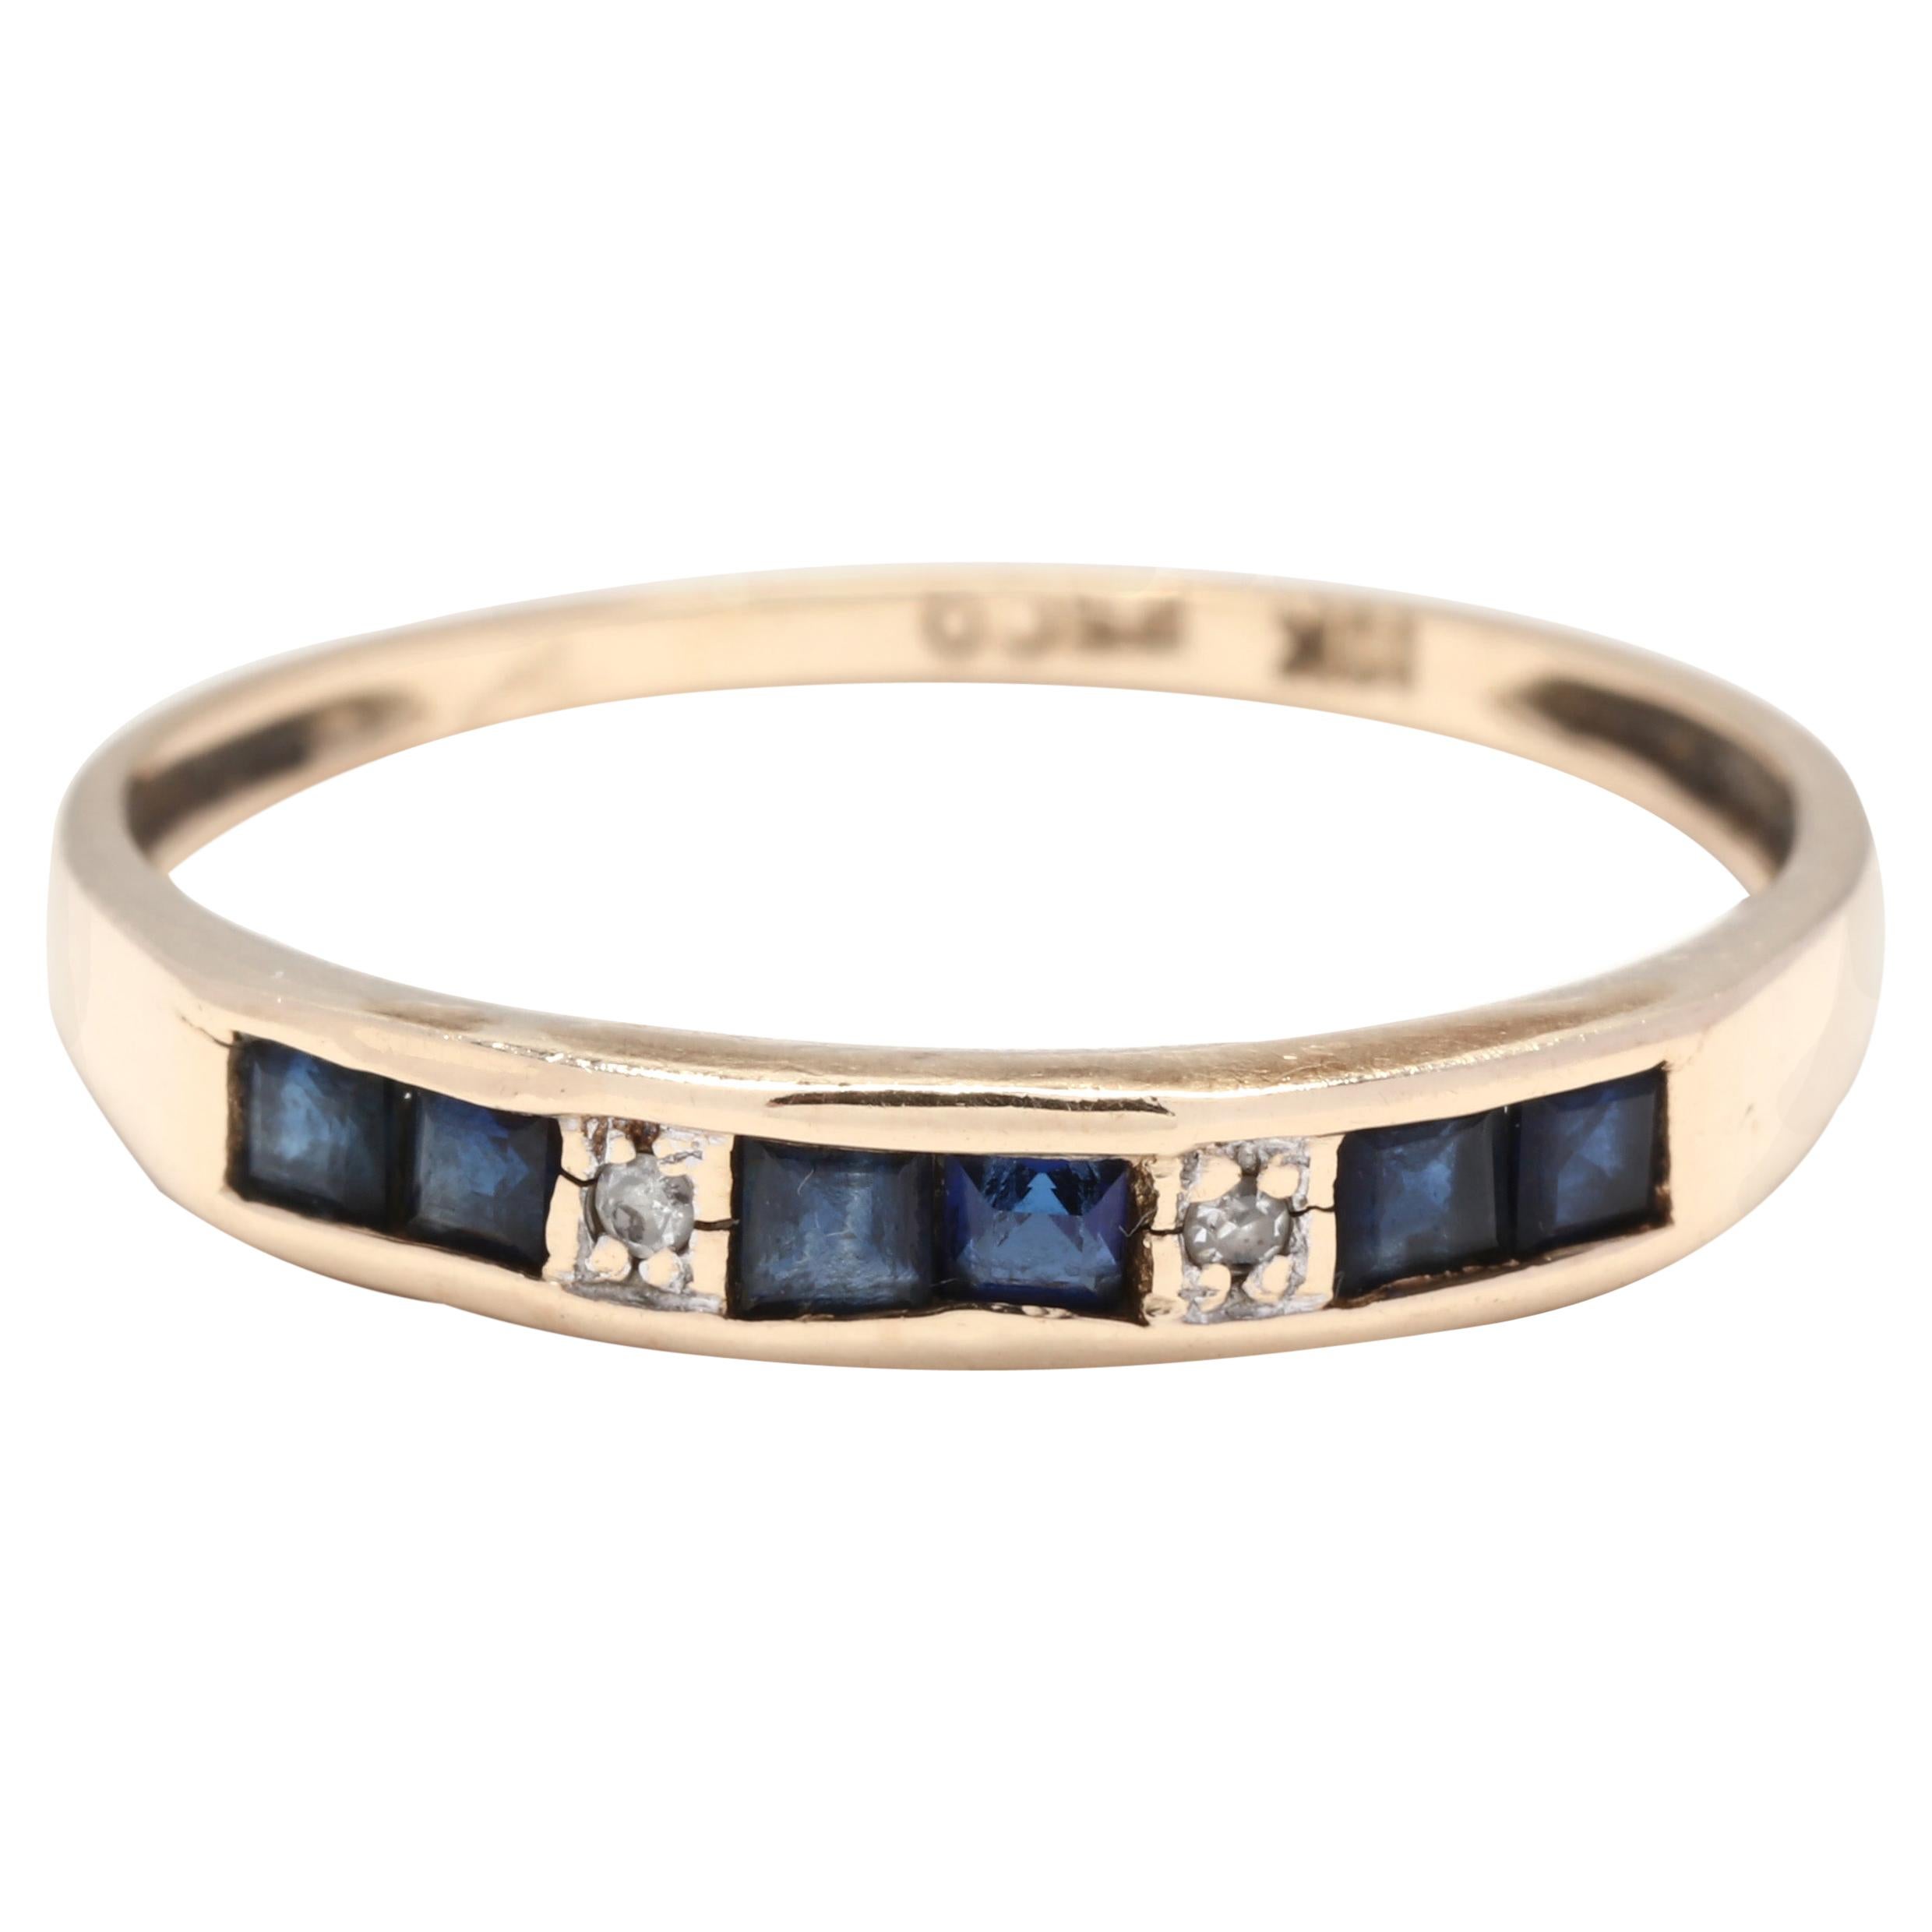 10 Karat Yellow Gold, Sapphire and Diamond Stackable Band Ring